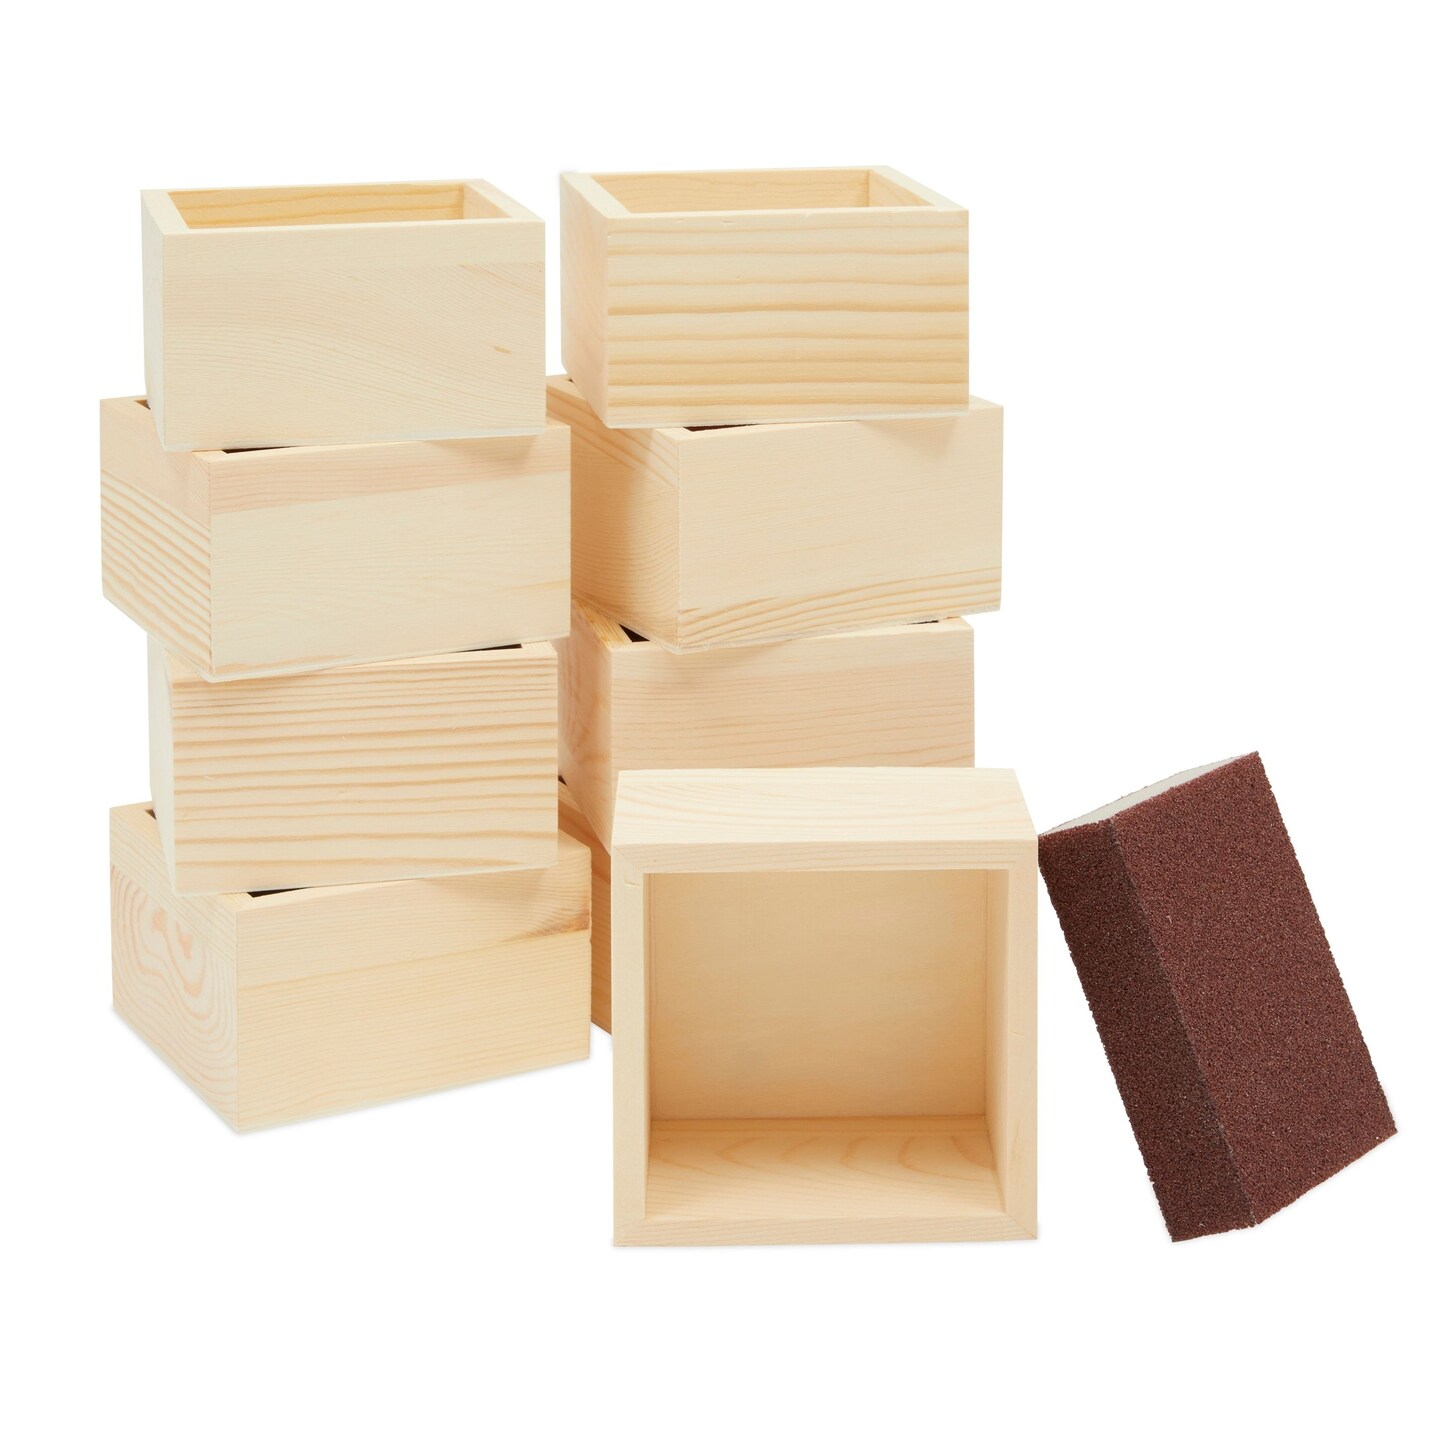 Wooden Boxes & Crates, For Storage & Home Decor